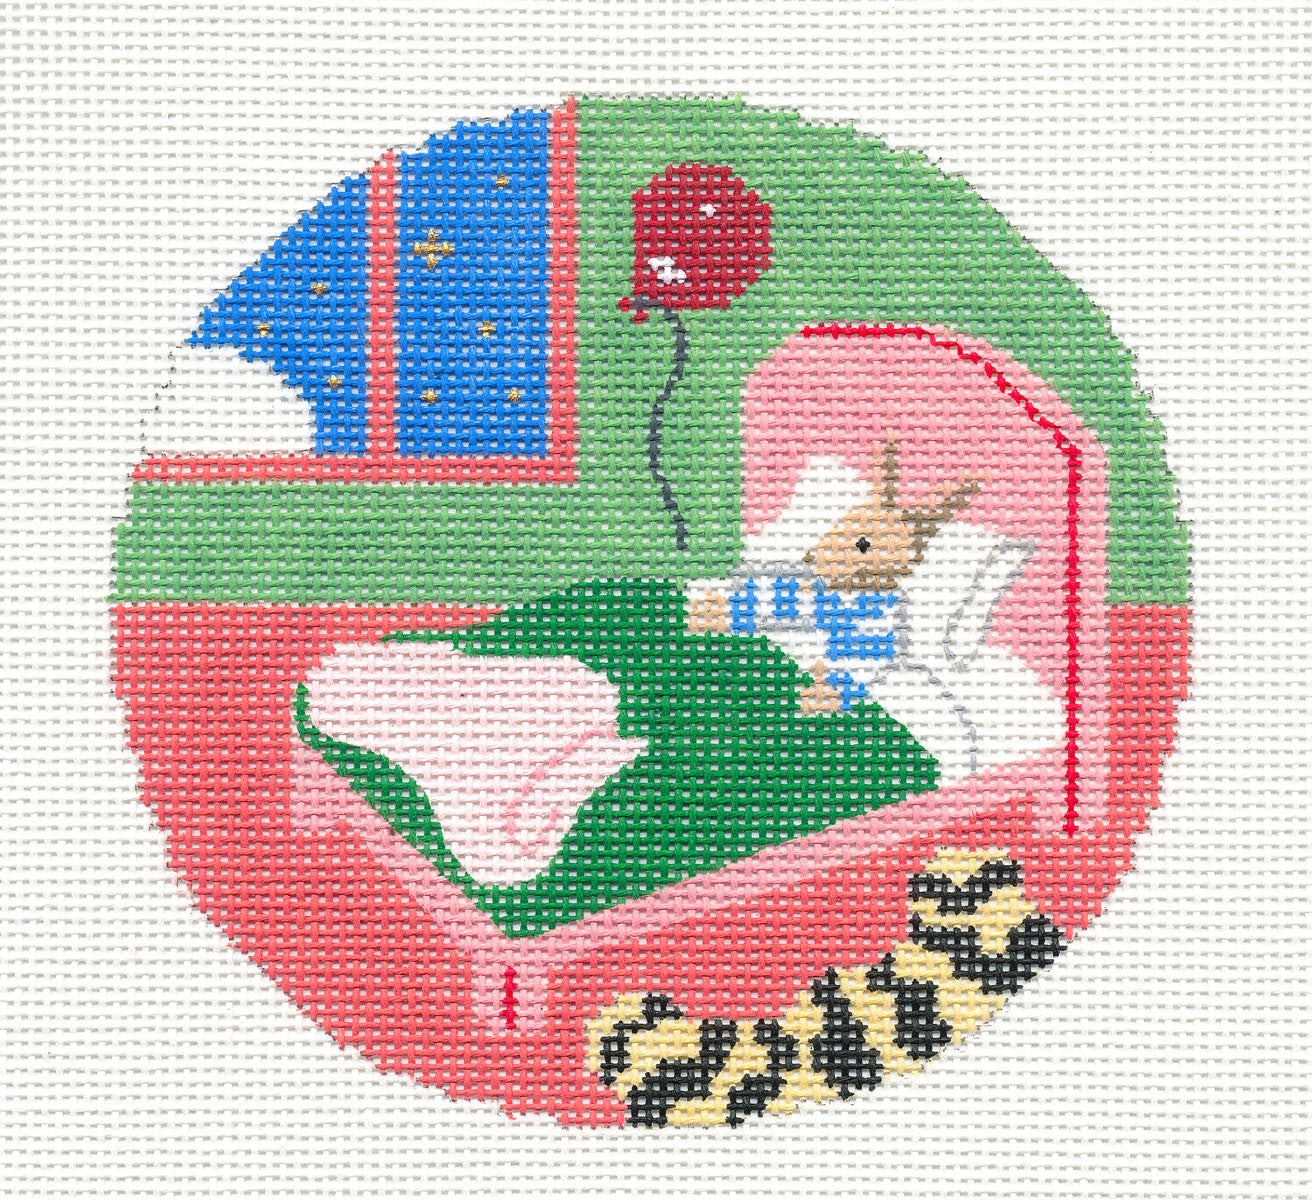 Child's Round ~ Goodnight Moon Bunny in Bed with Balloon 4.25" handpainted Needlepoint Canvas by Silver Needle